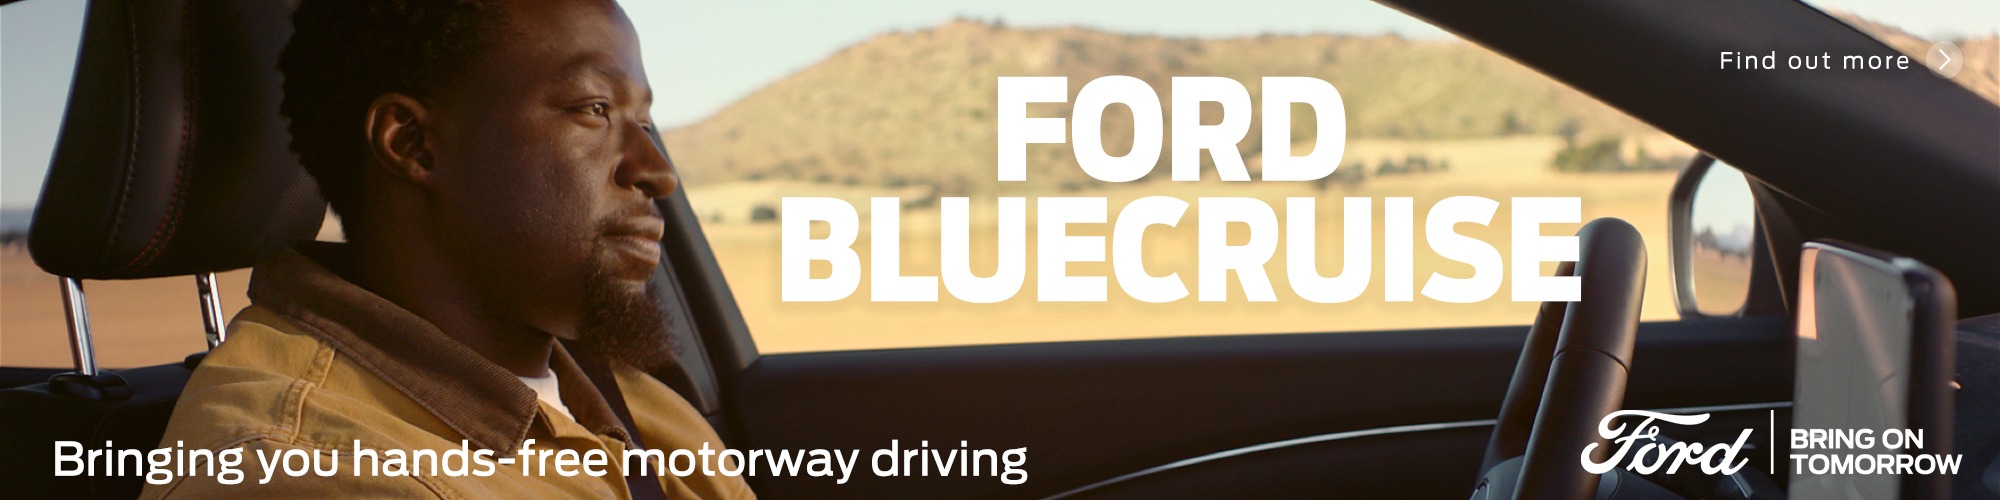 ford blue-cruise Banner